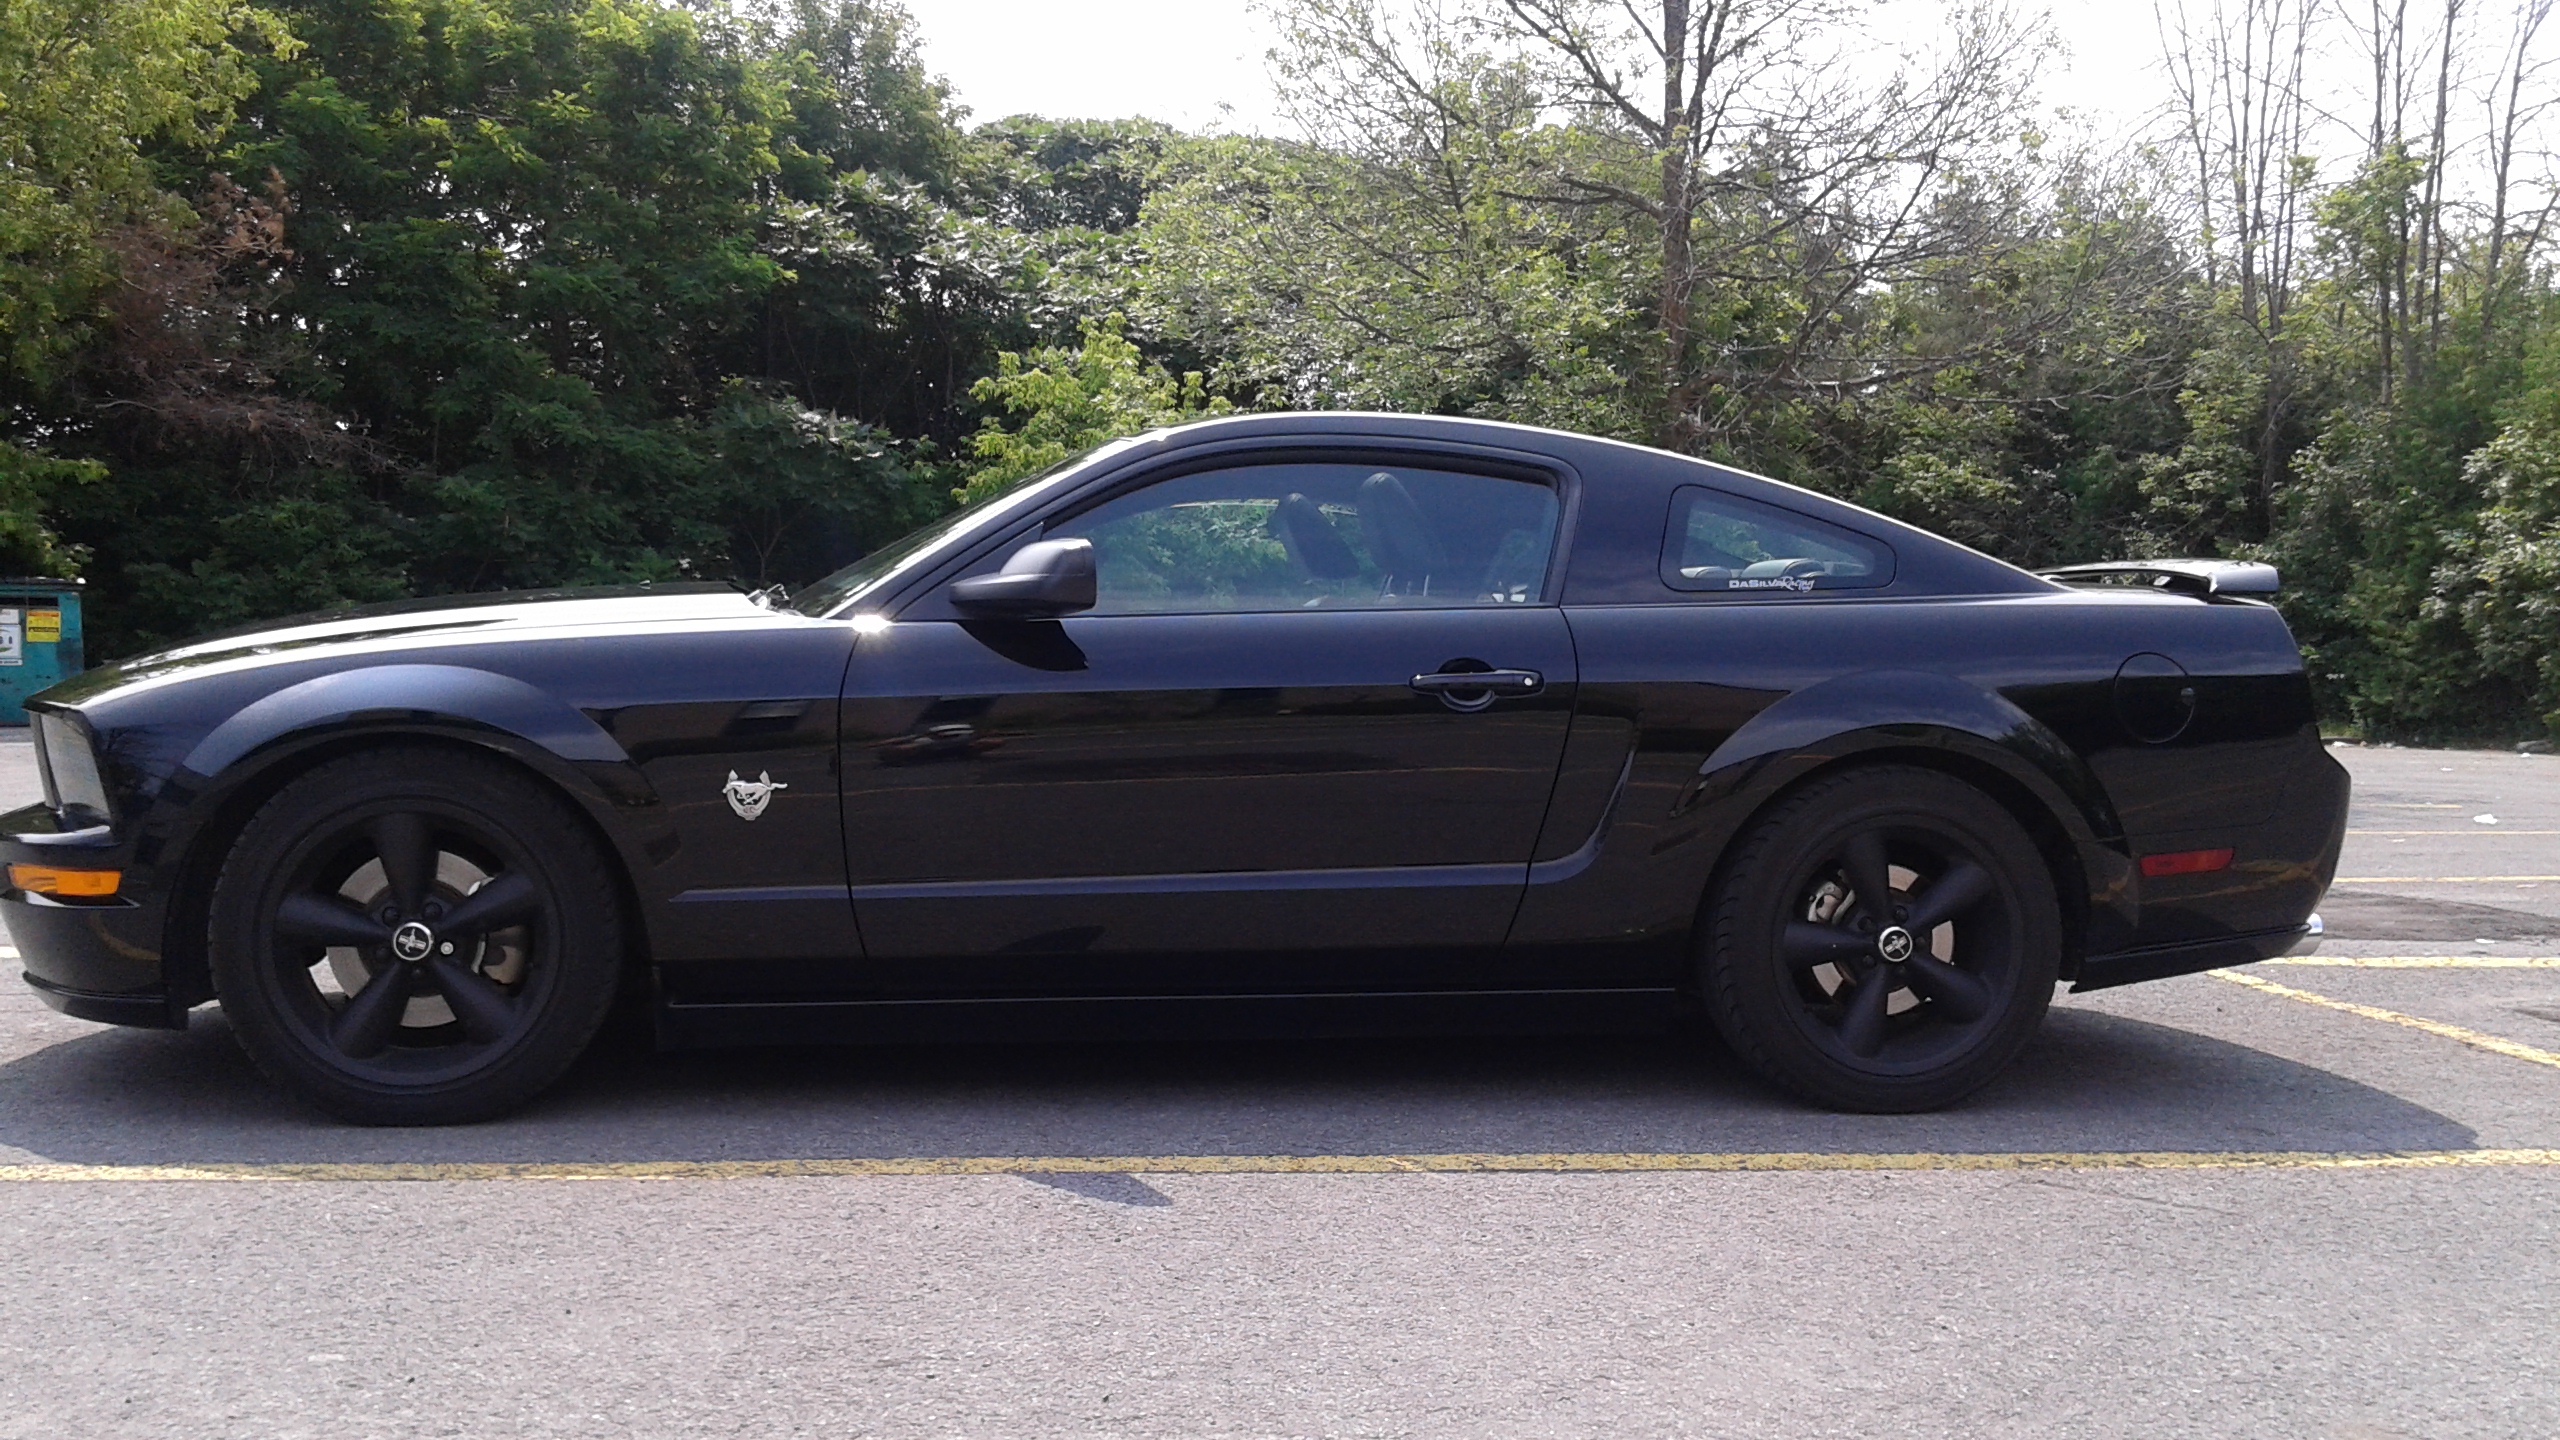 Gt ford mustangs for sale in nc by owner